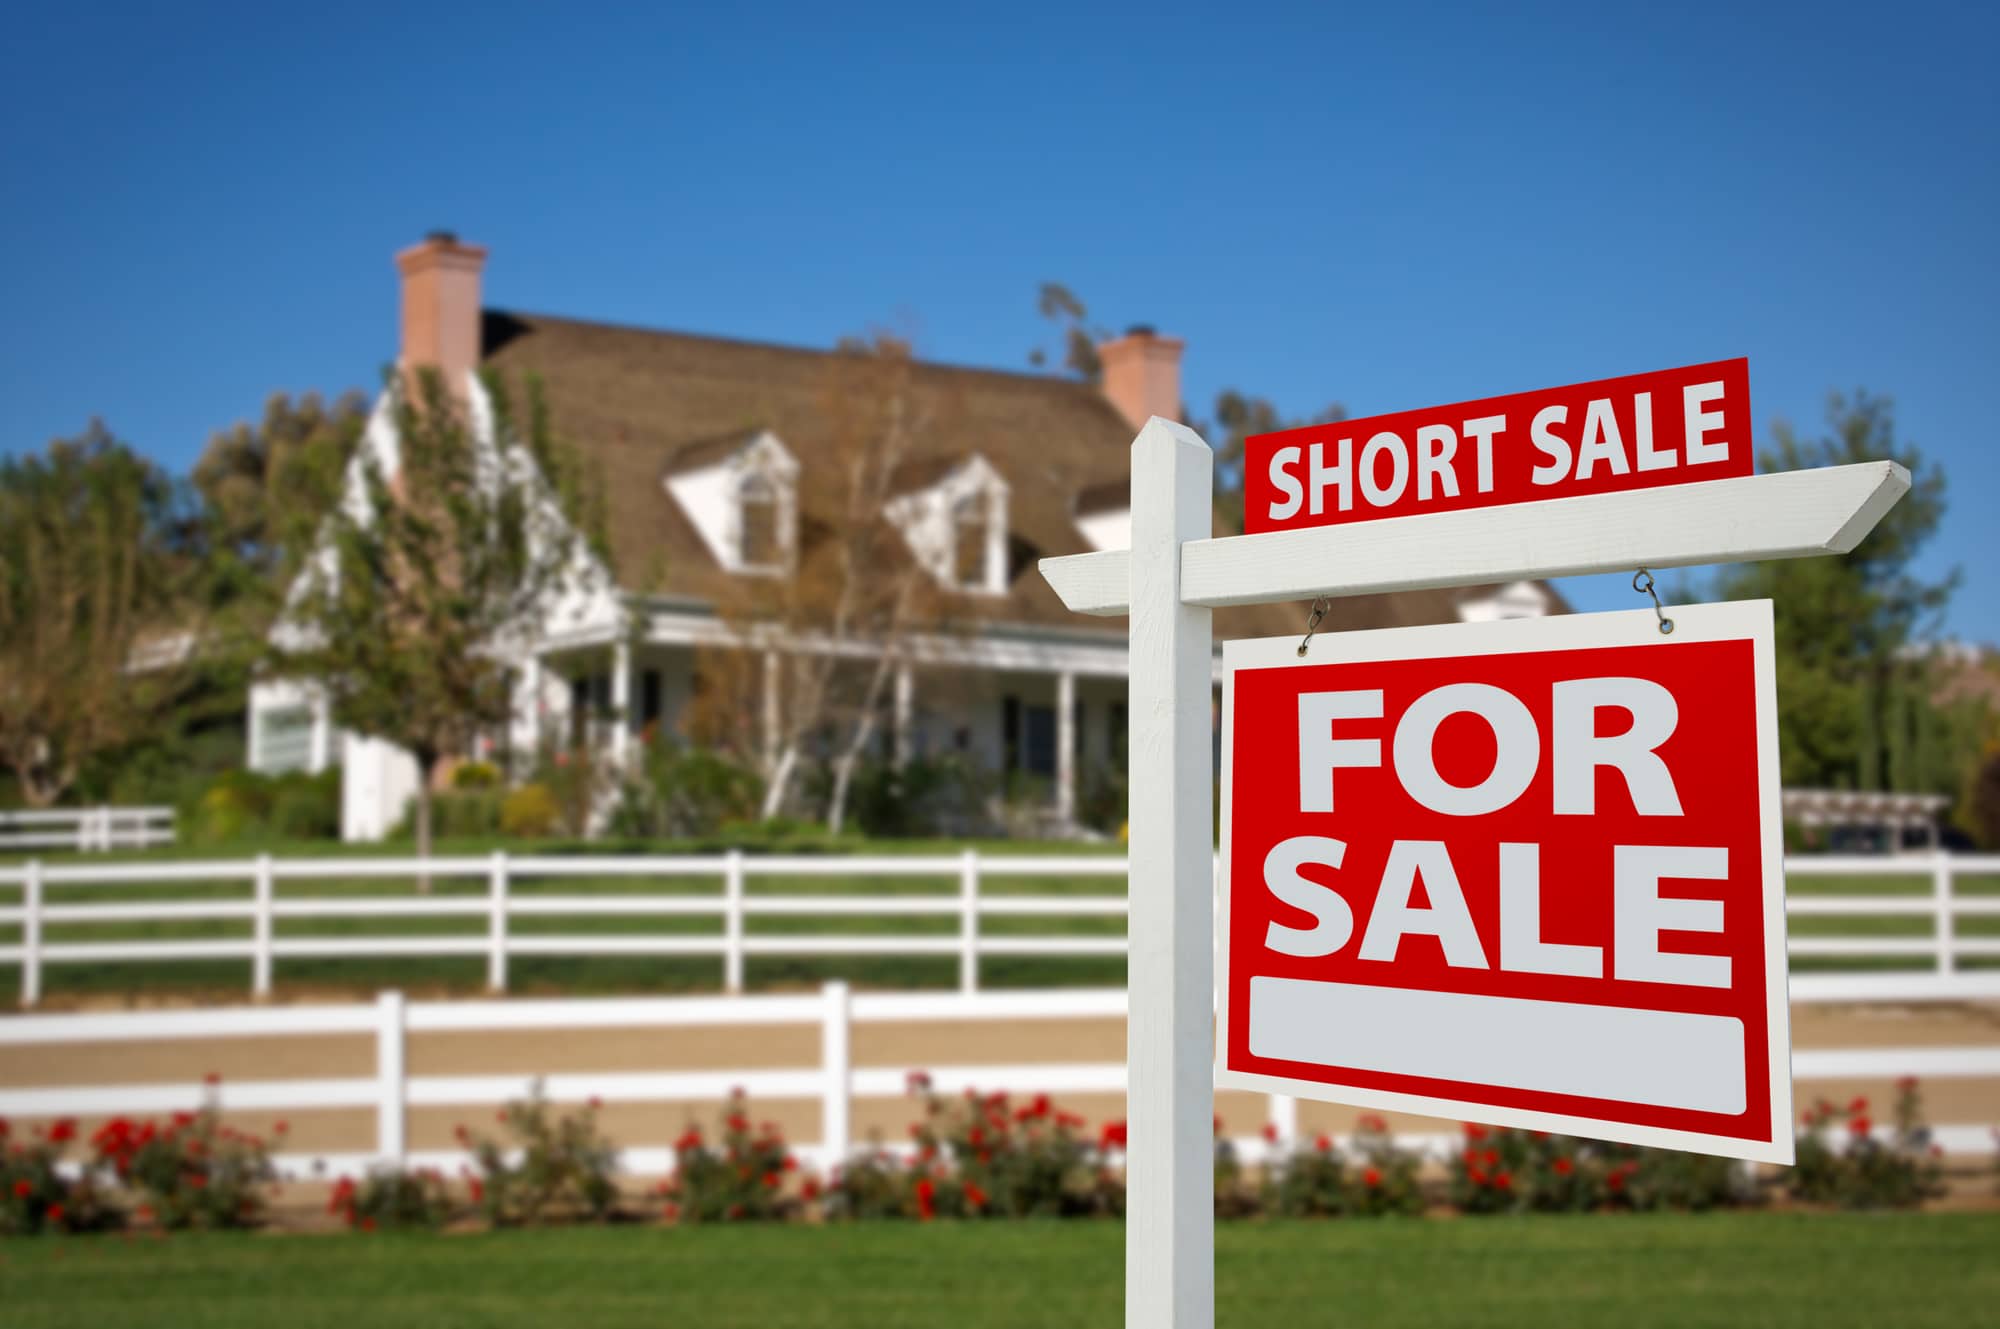 What Is a Short Sale?